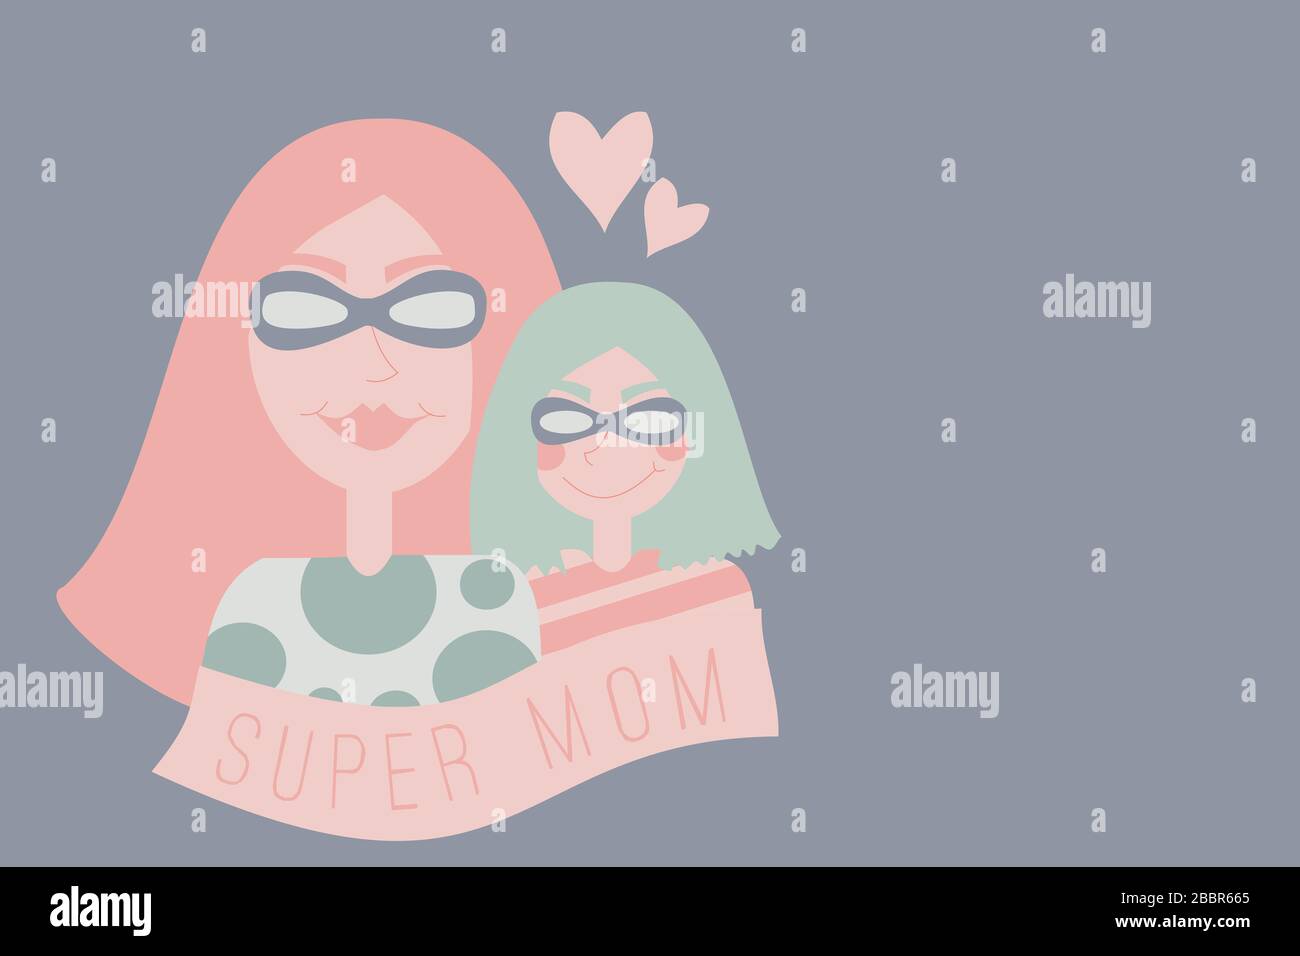 Super Mom Illustration - Mother and daughter wearing super hero costume - Mother’s Day Greeting Card Stock Photo